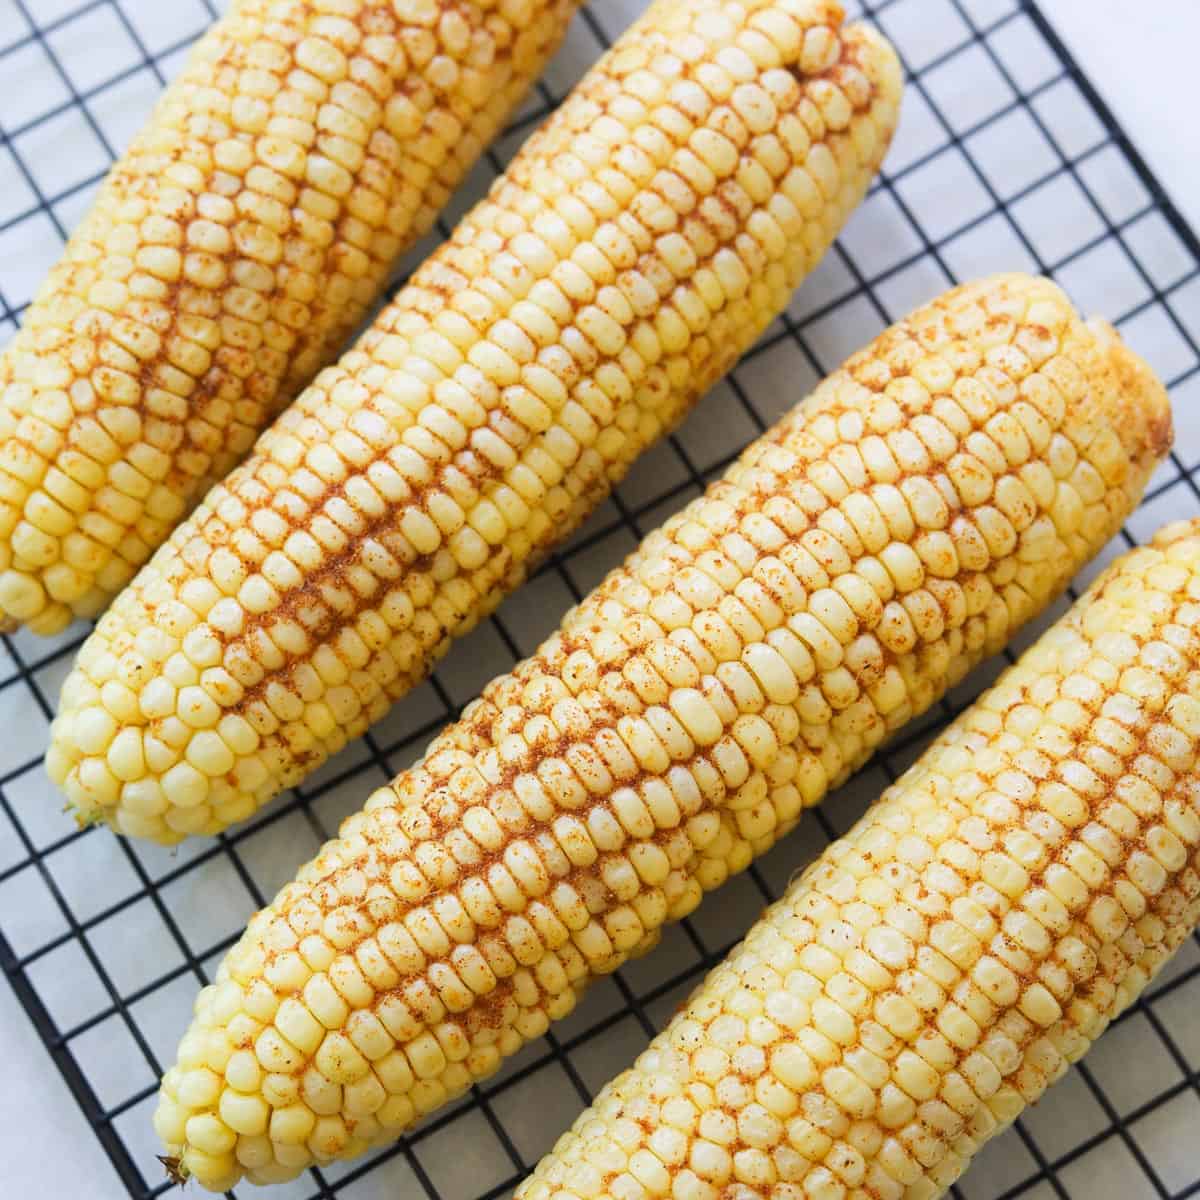 Cob the corn on How to